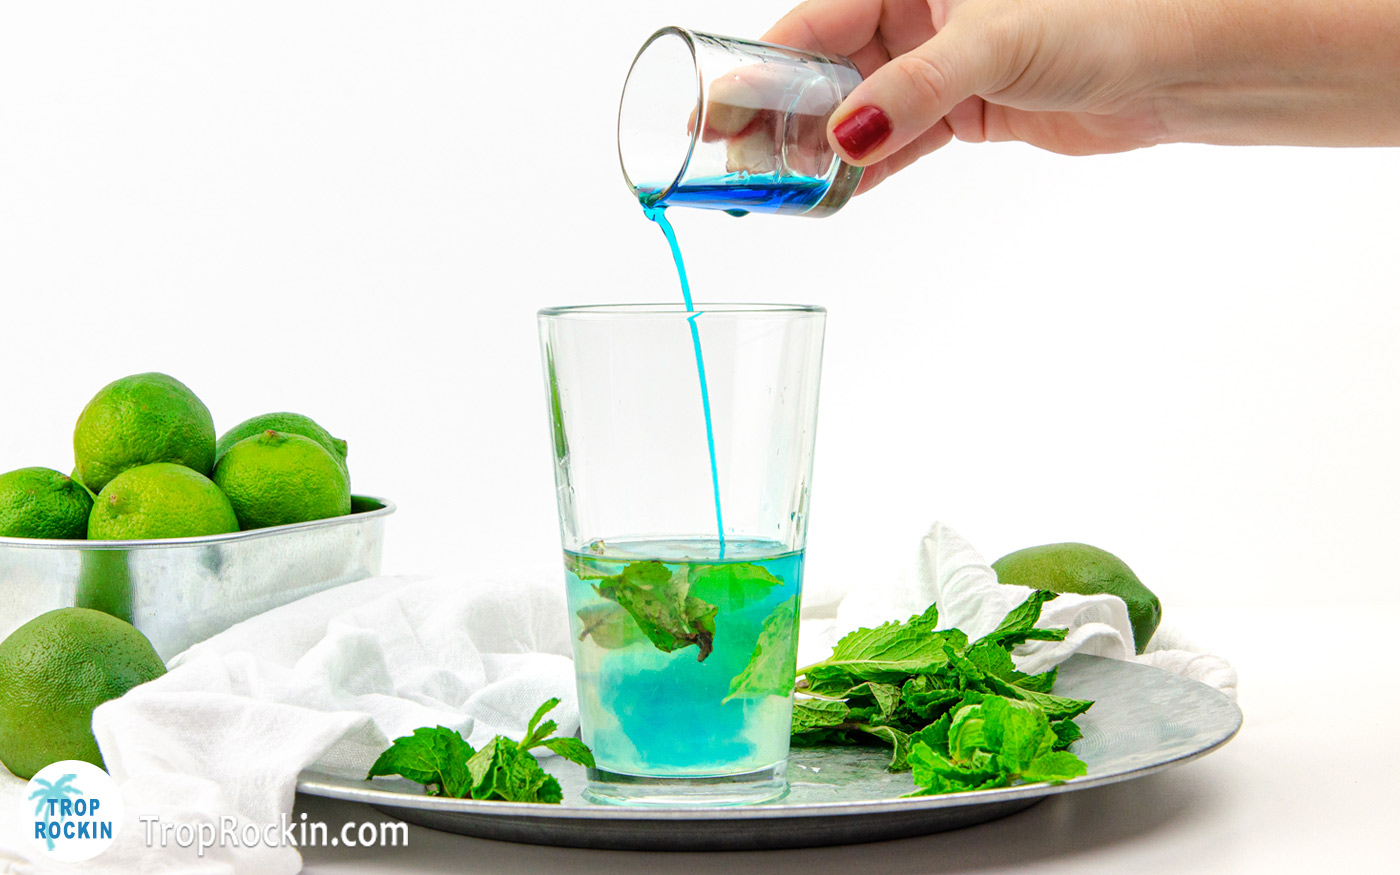 Pouring Blue Curacao into the Mojito drink.